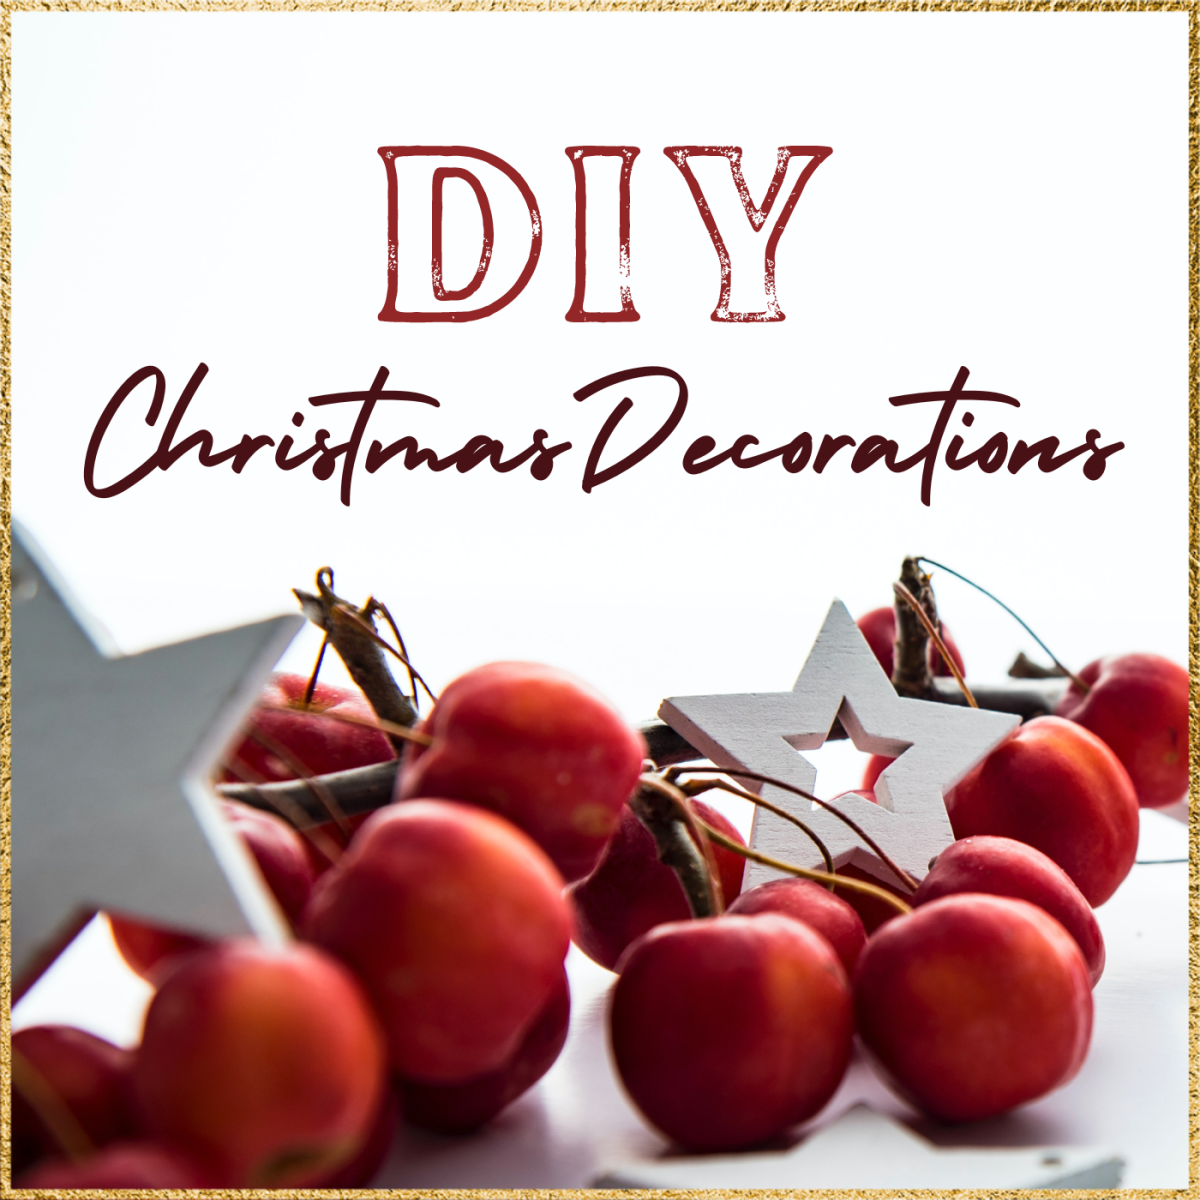 Try some DIY décor this holiday to spruce up your home while minding your budget! See video tutorials and photo inspiration in this article.